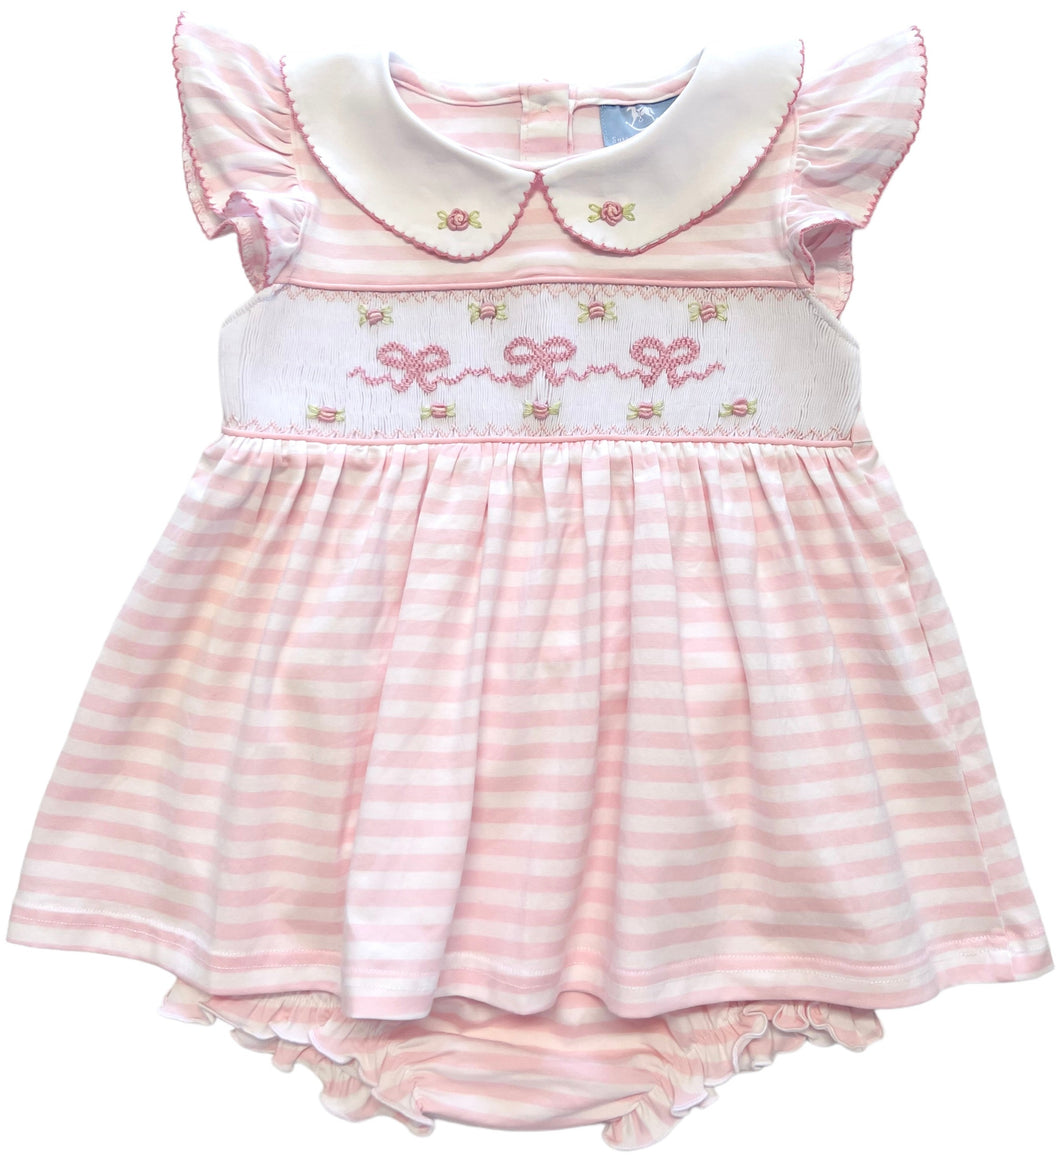 The Smocked Layette Set - Baby Pink Bows & Rosettes